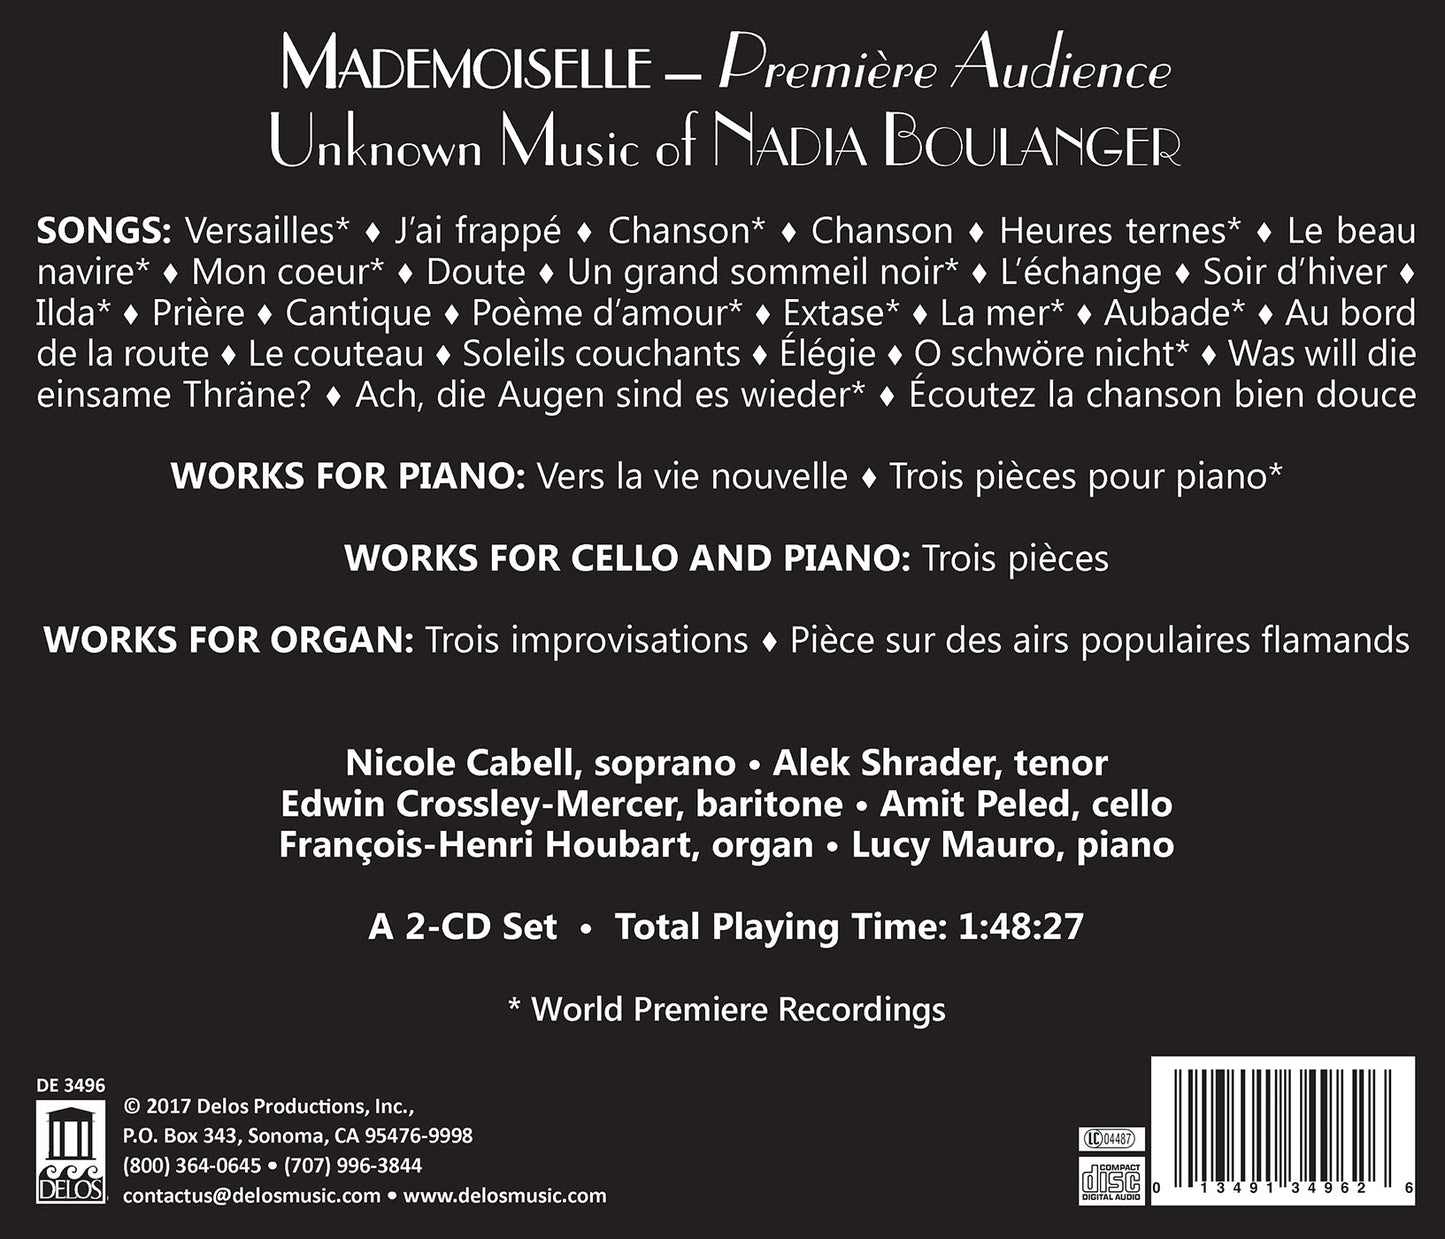 Mademoiselle: Première Audience – Unknown Music Of Nadia Boulanger